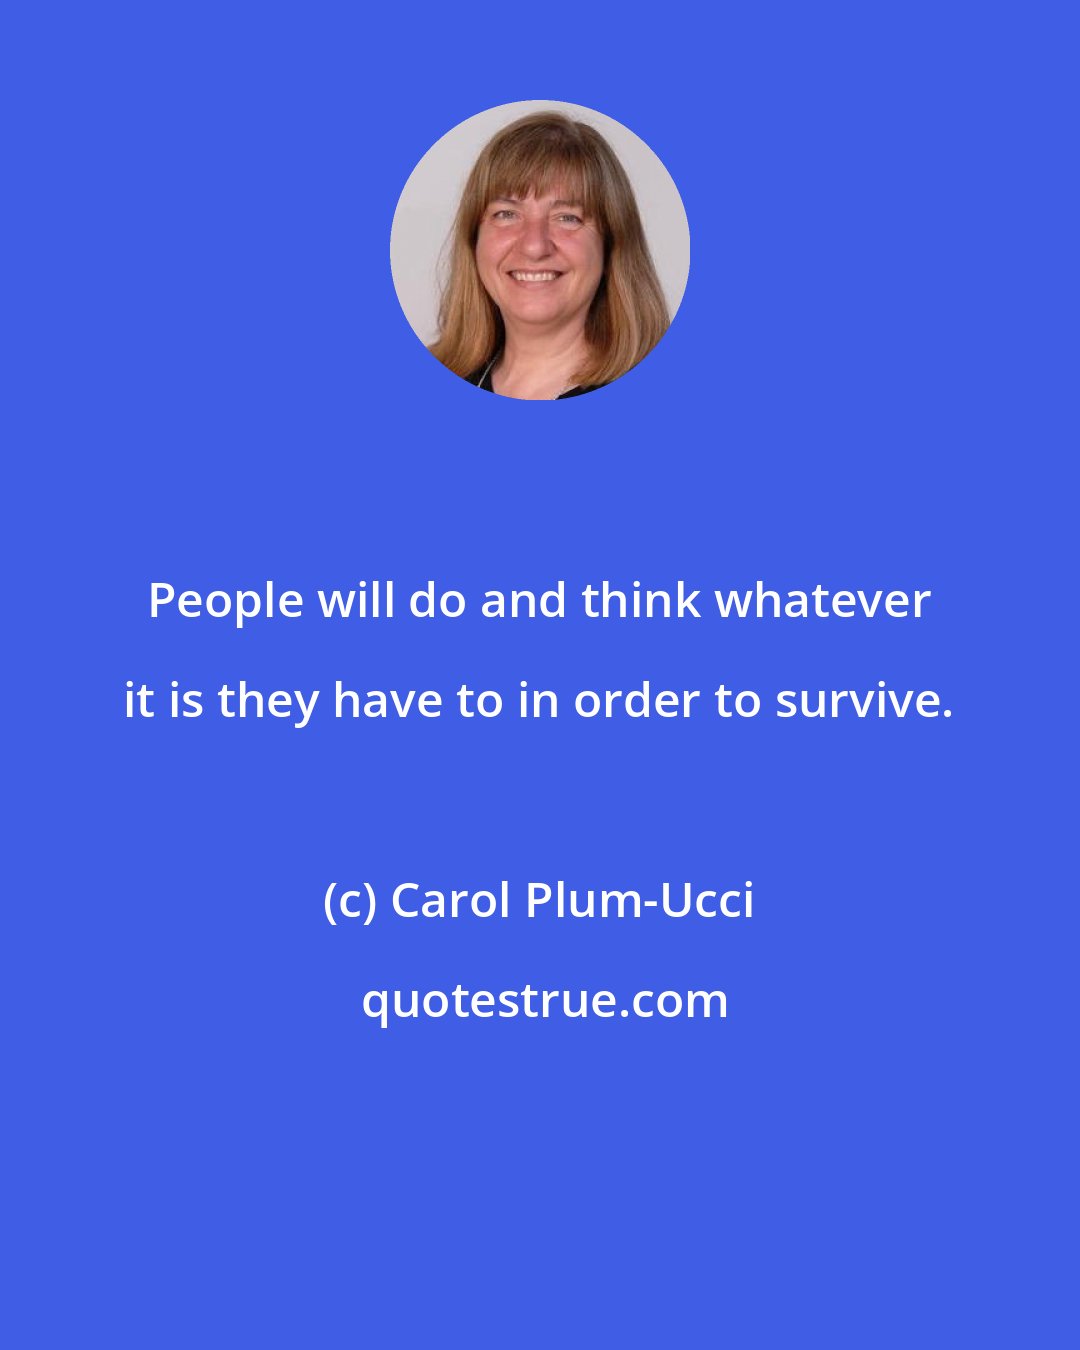 Carol Plum-Ucci: People will do and think whatever it is they have to in order to survive.